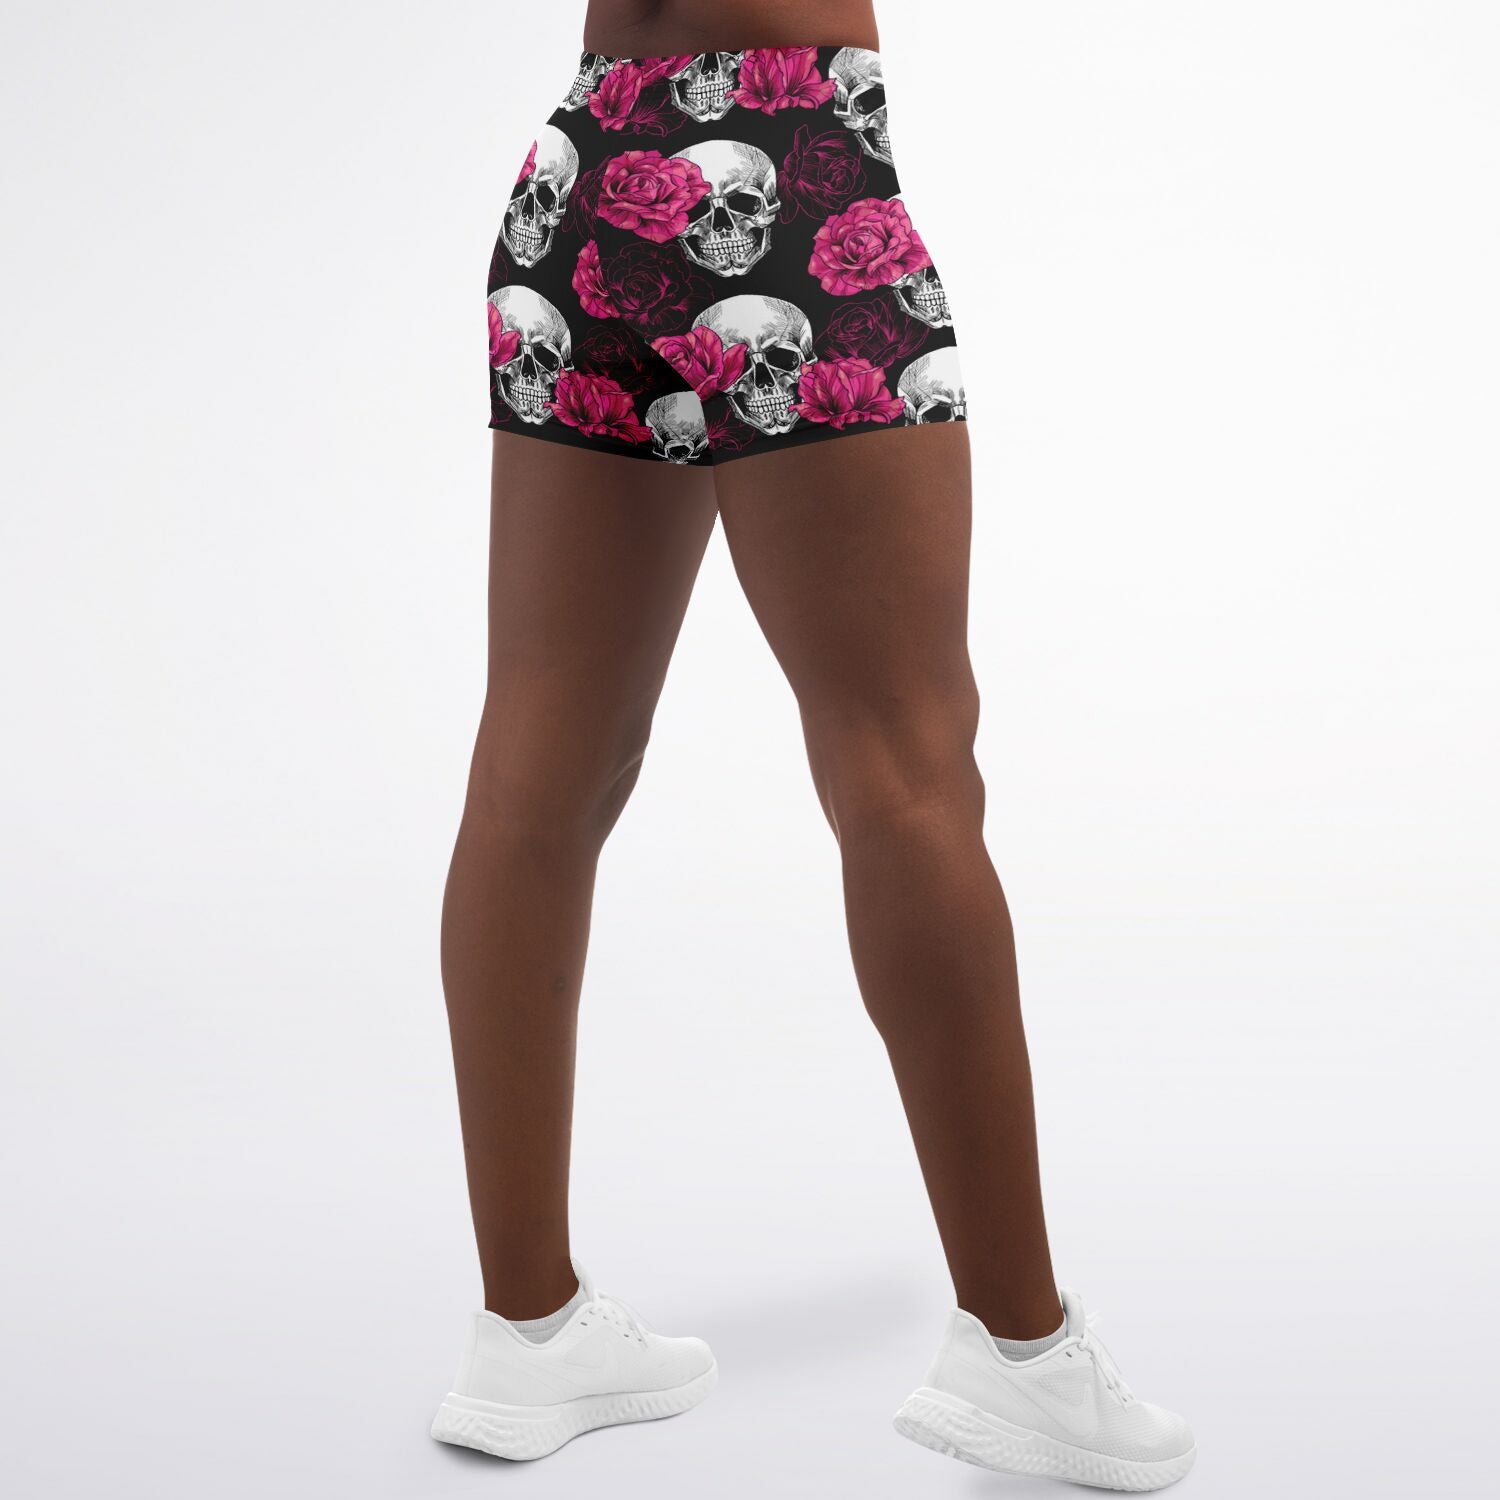 Women's Mid-rise Pink Roses Skulls Athletic Booty Shorts